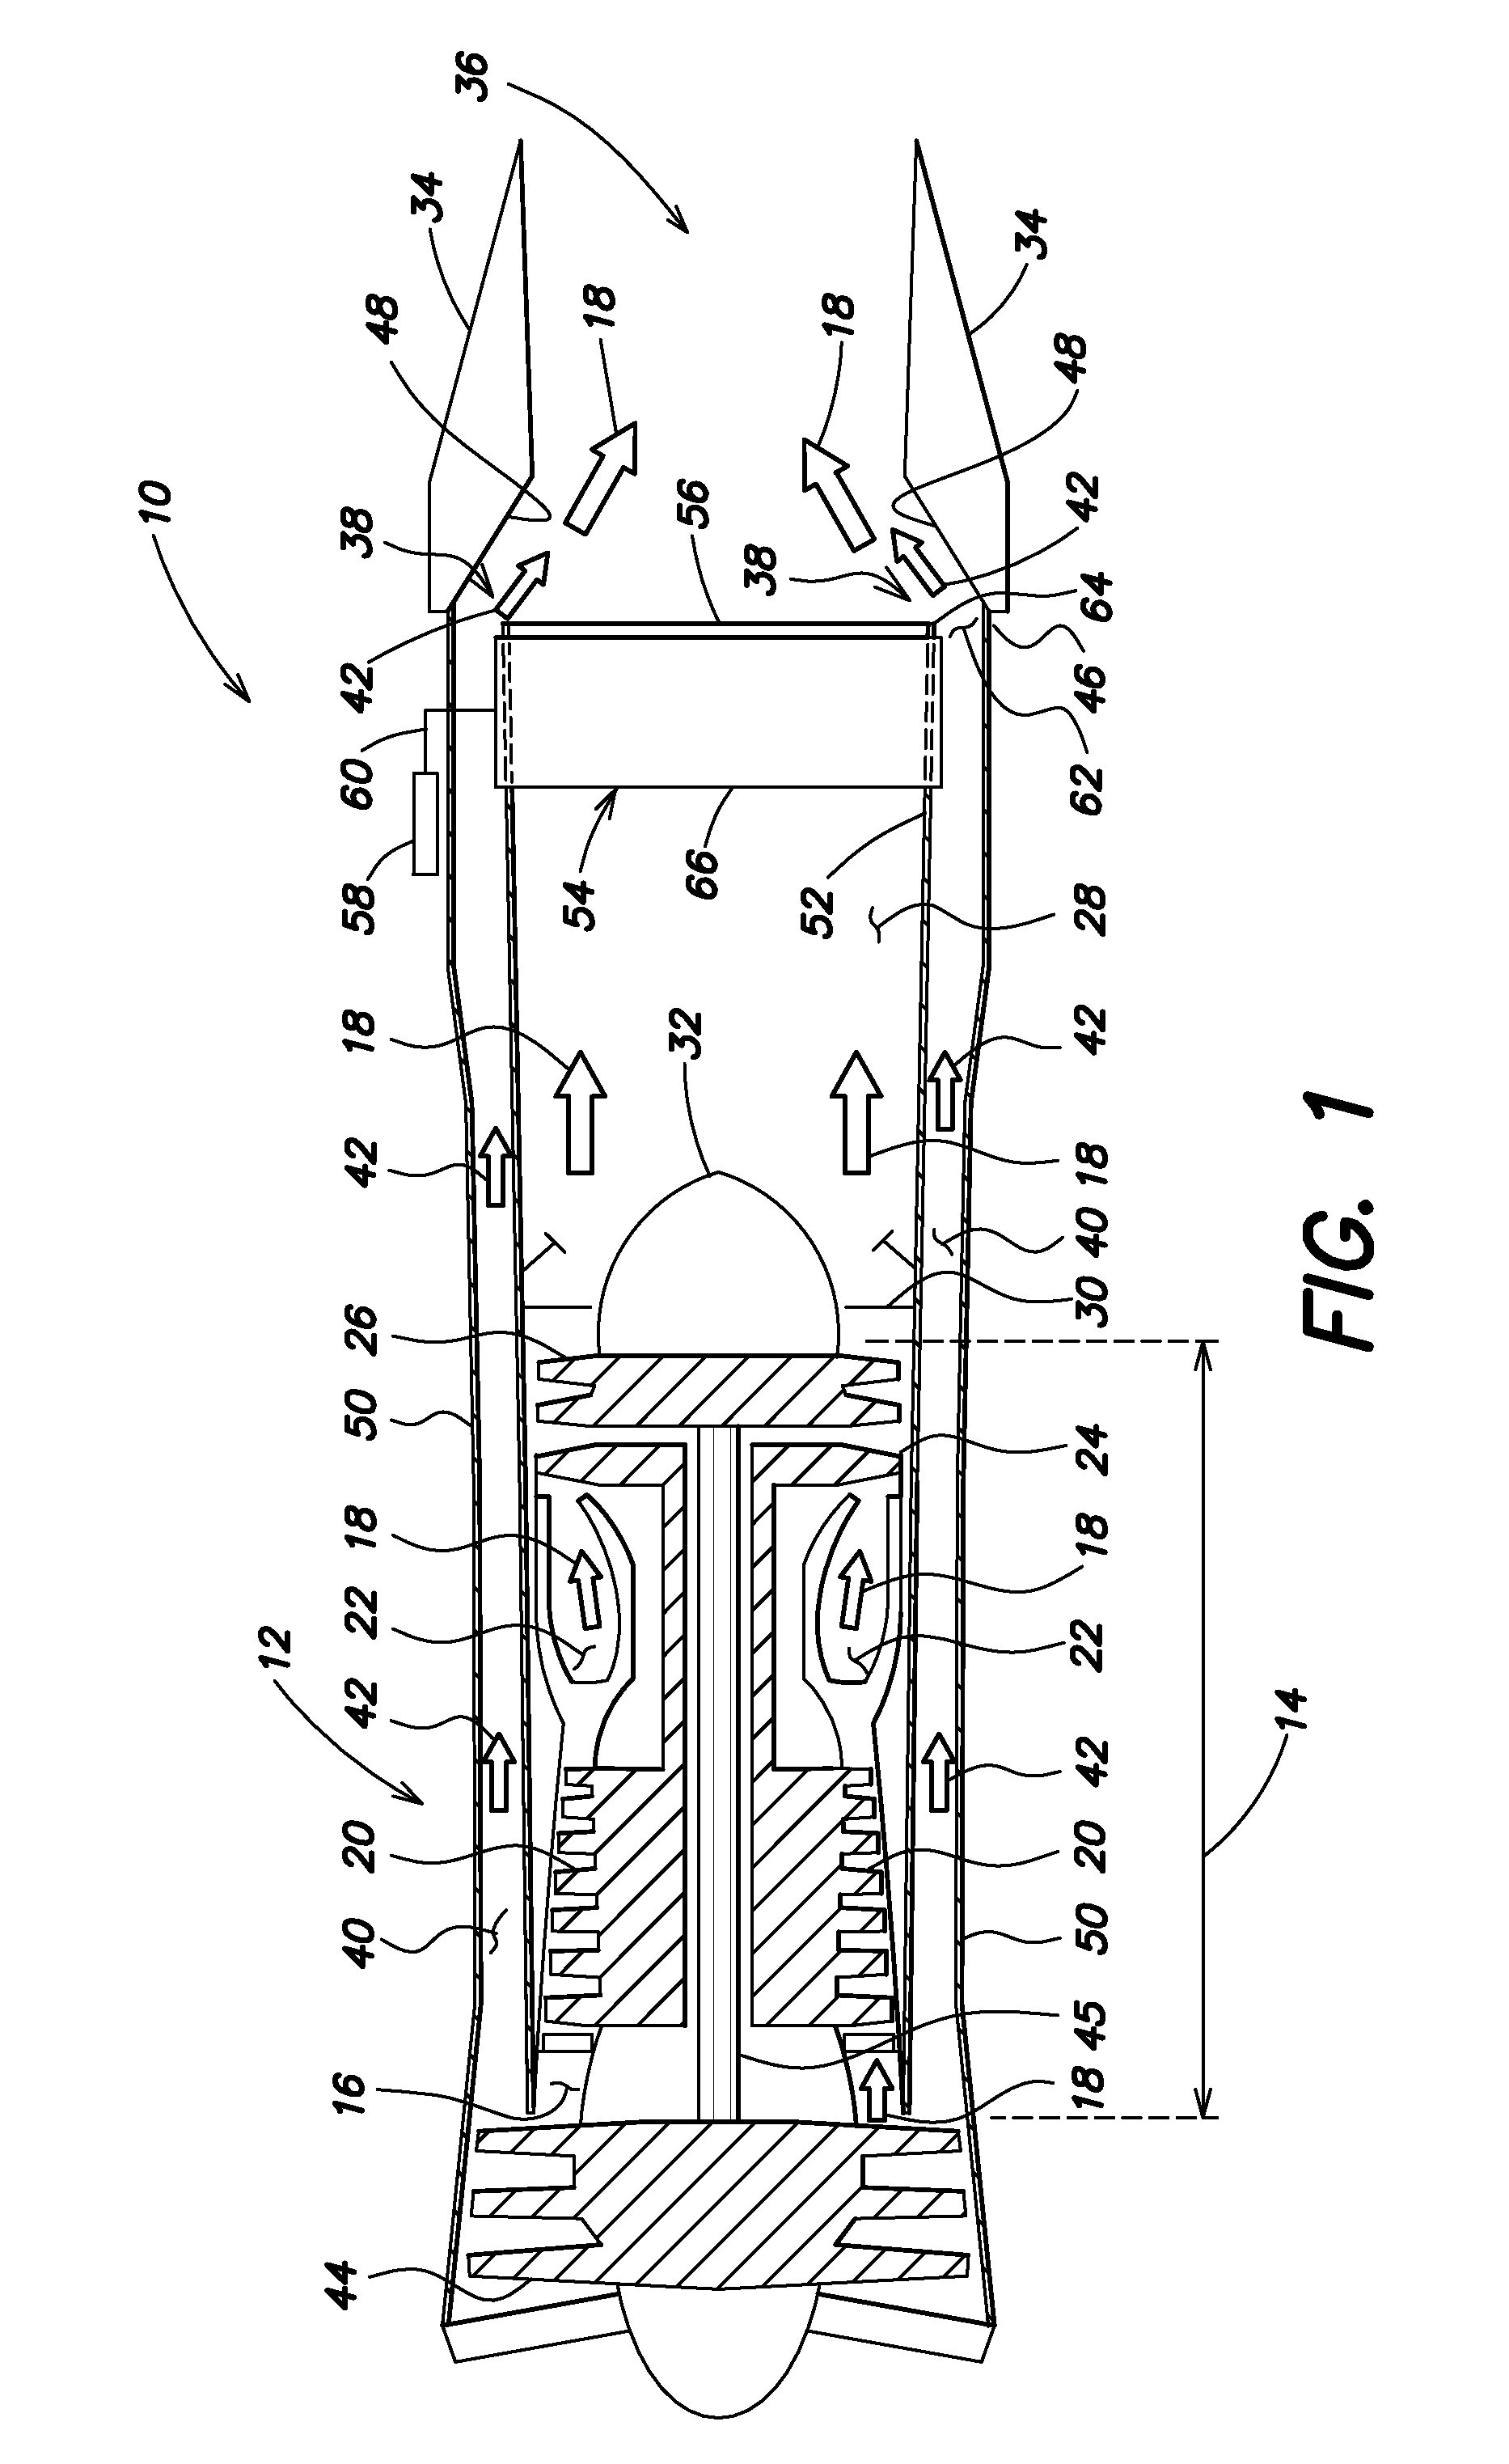 Gas Turbine Engine System for Modulating Flow of Fan By-Pass Air and Core Engine Air